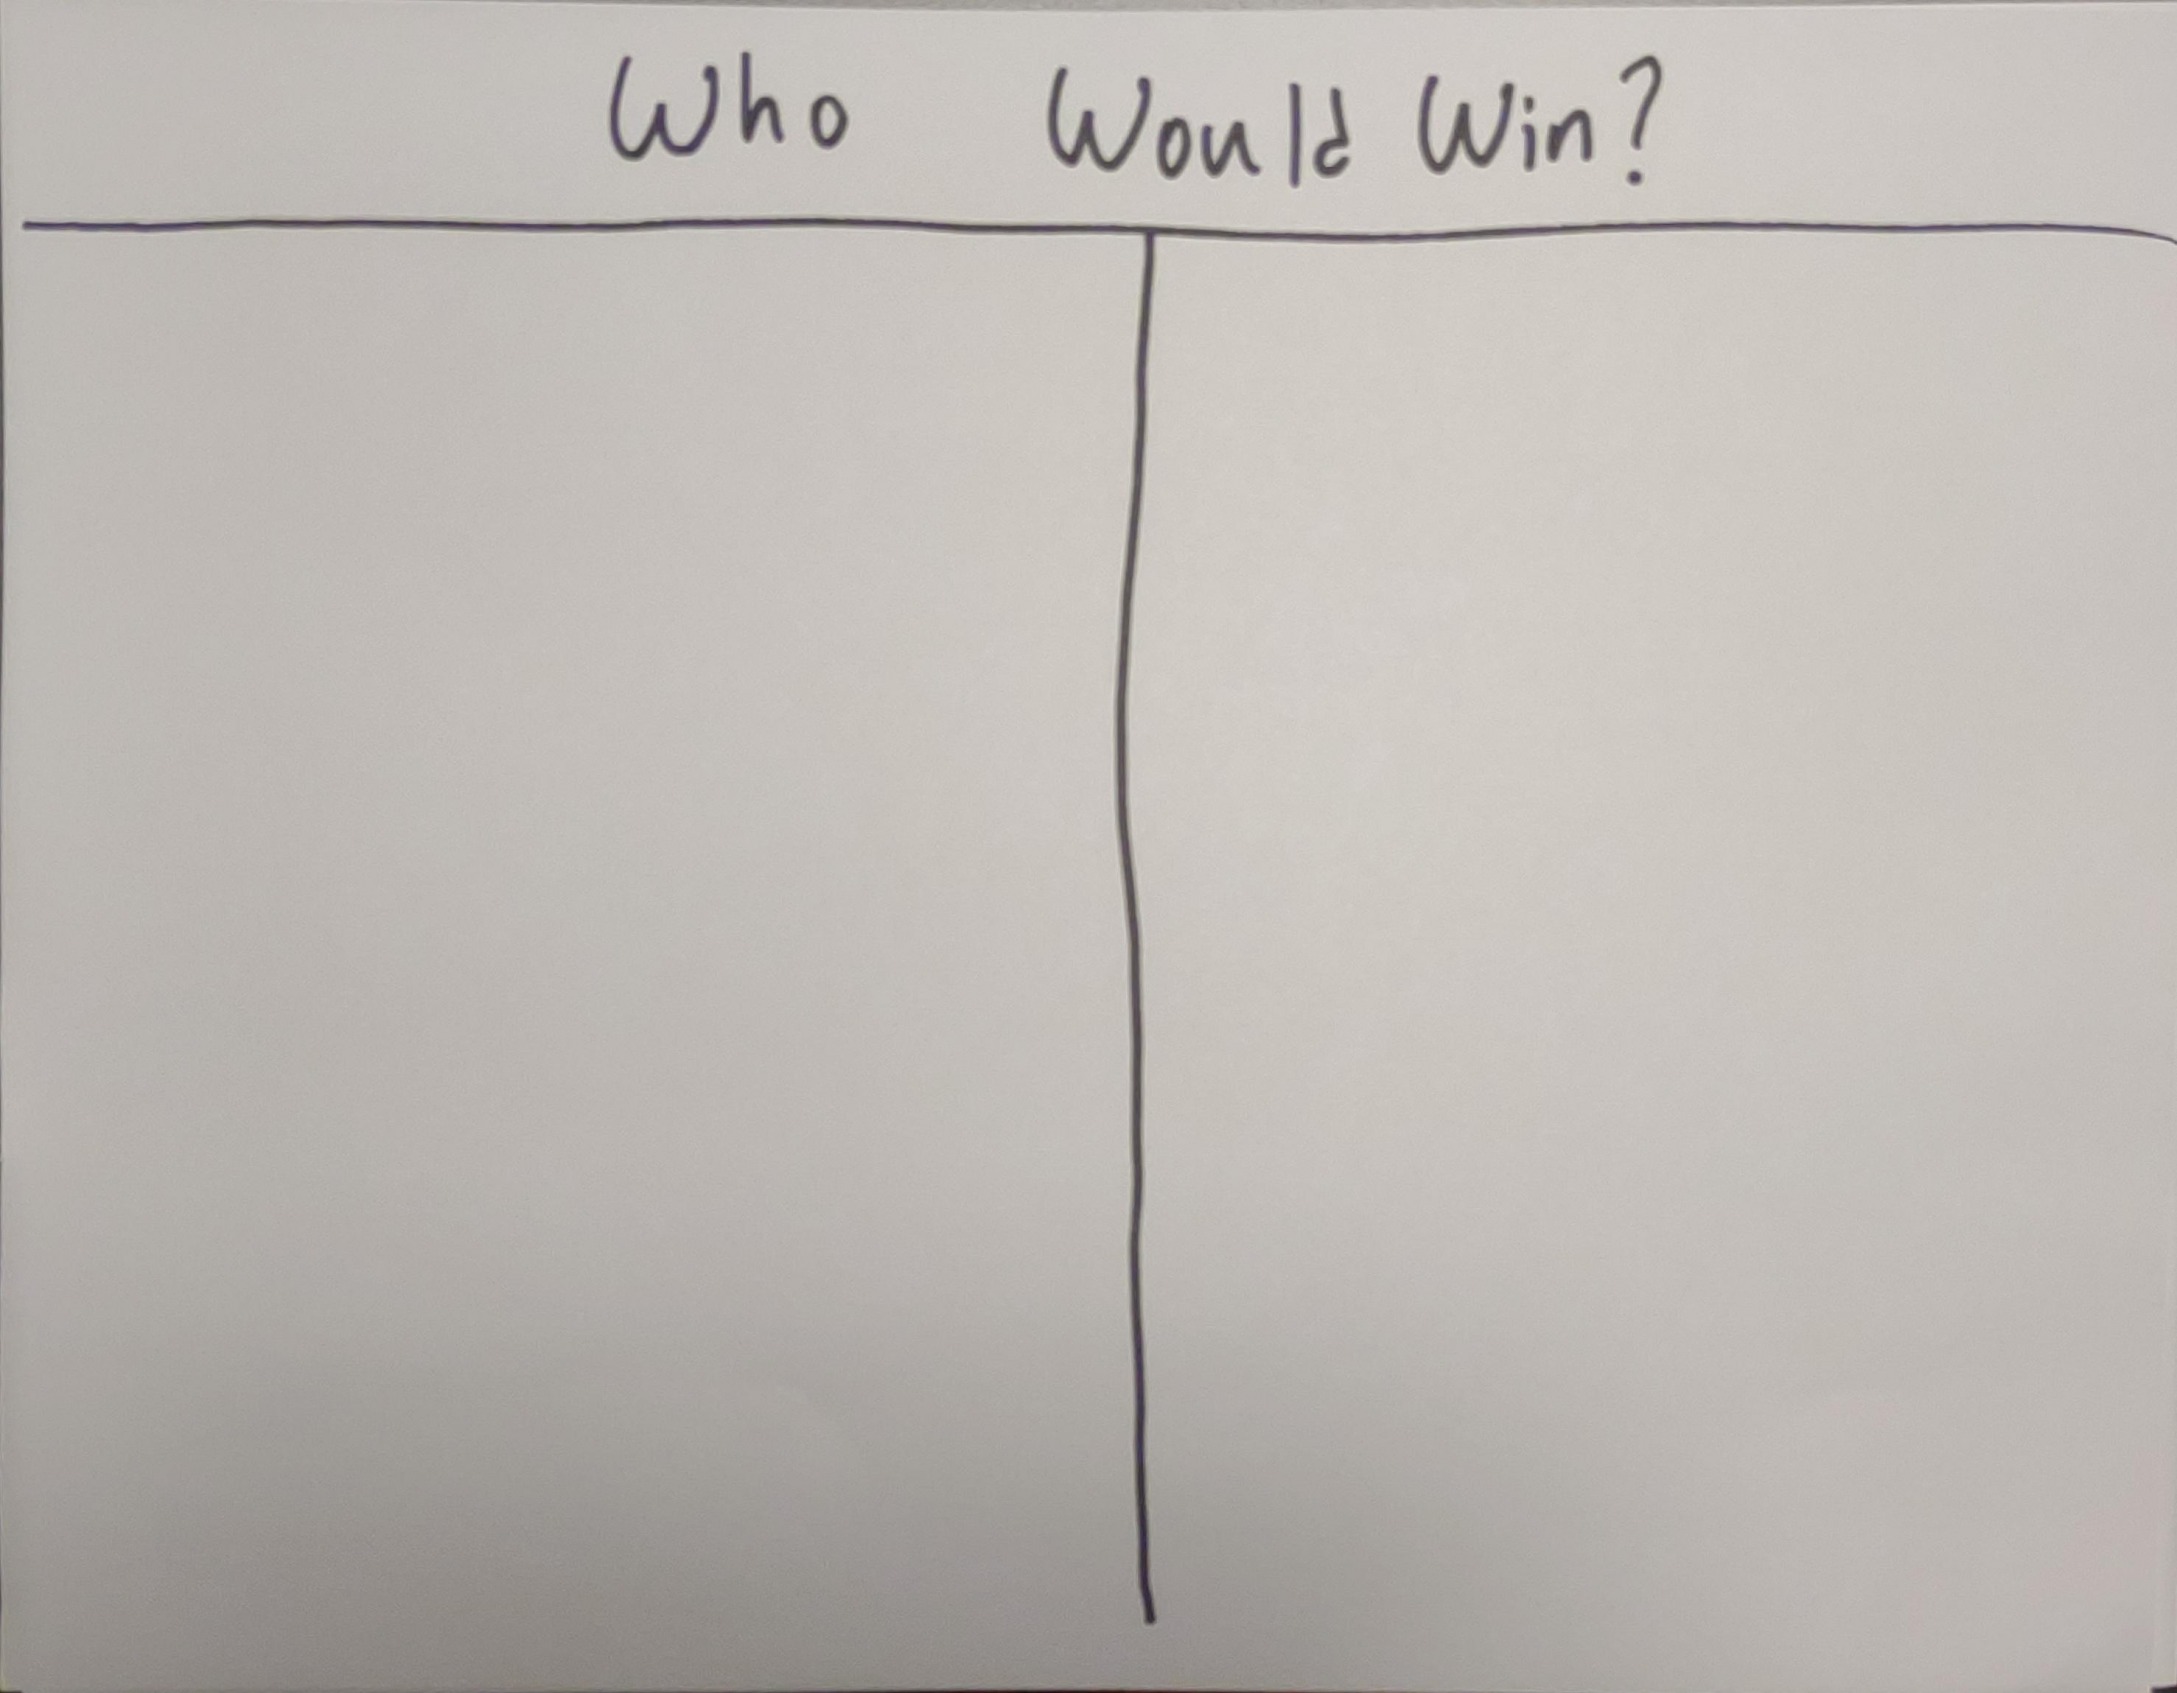 High Quality Who would win? Blank Meme Template